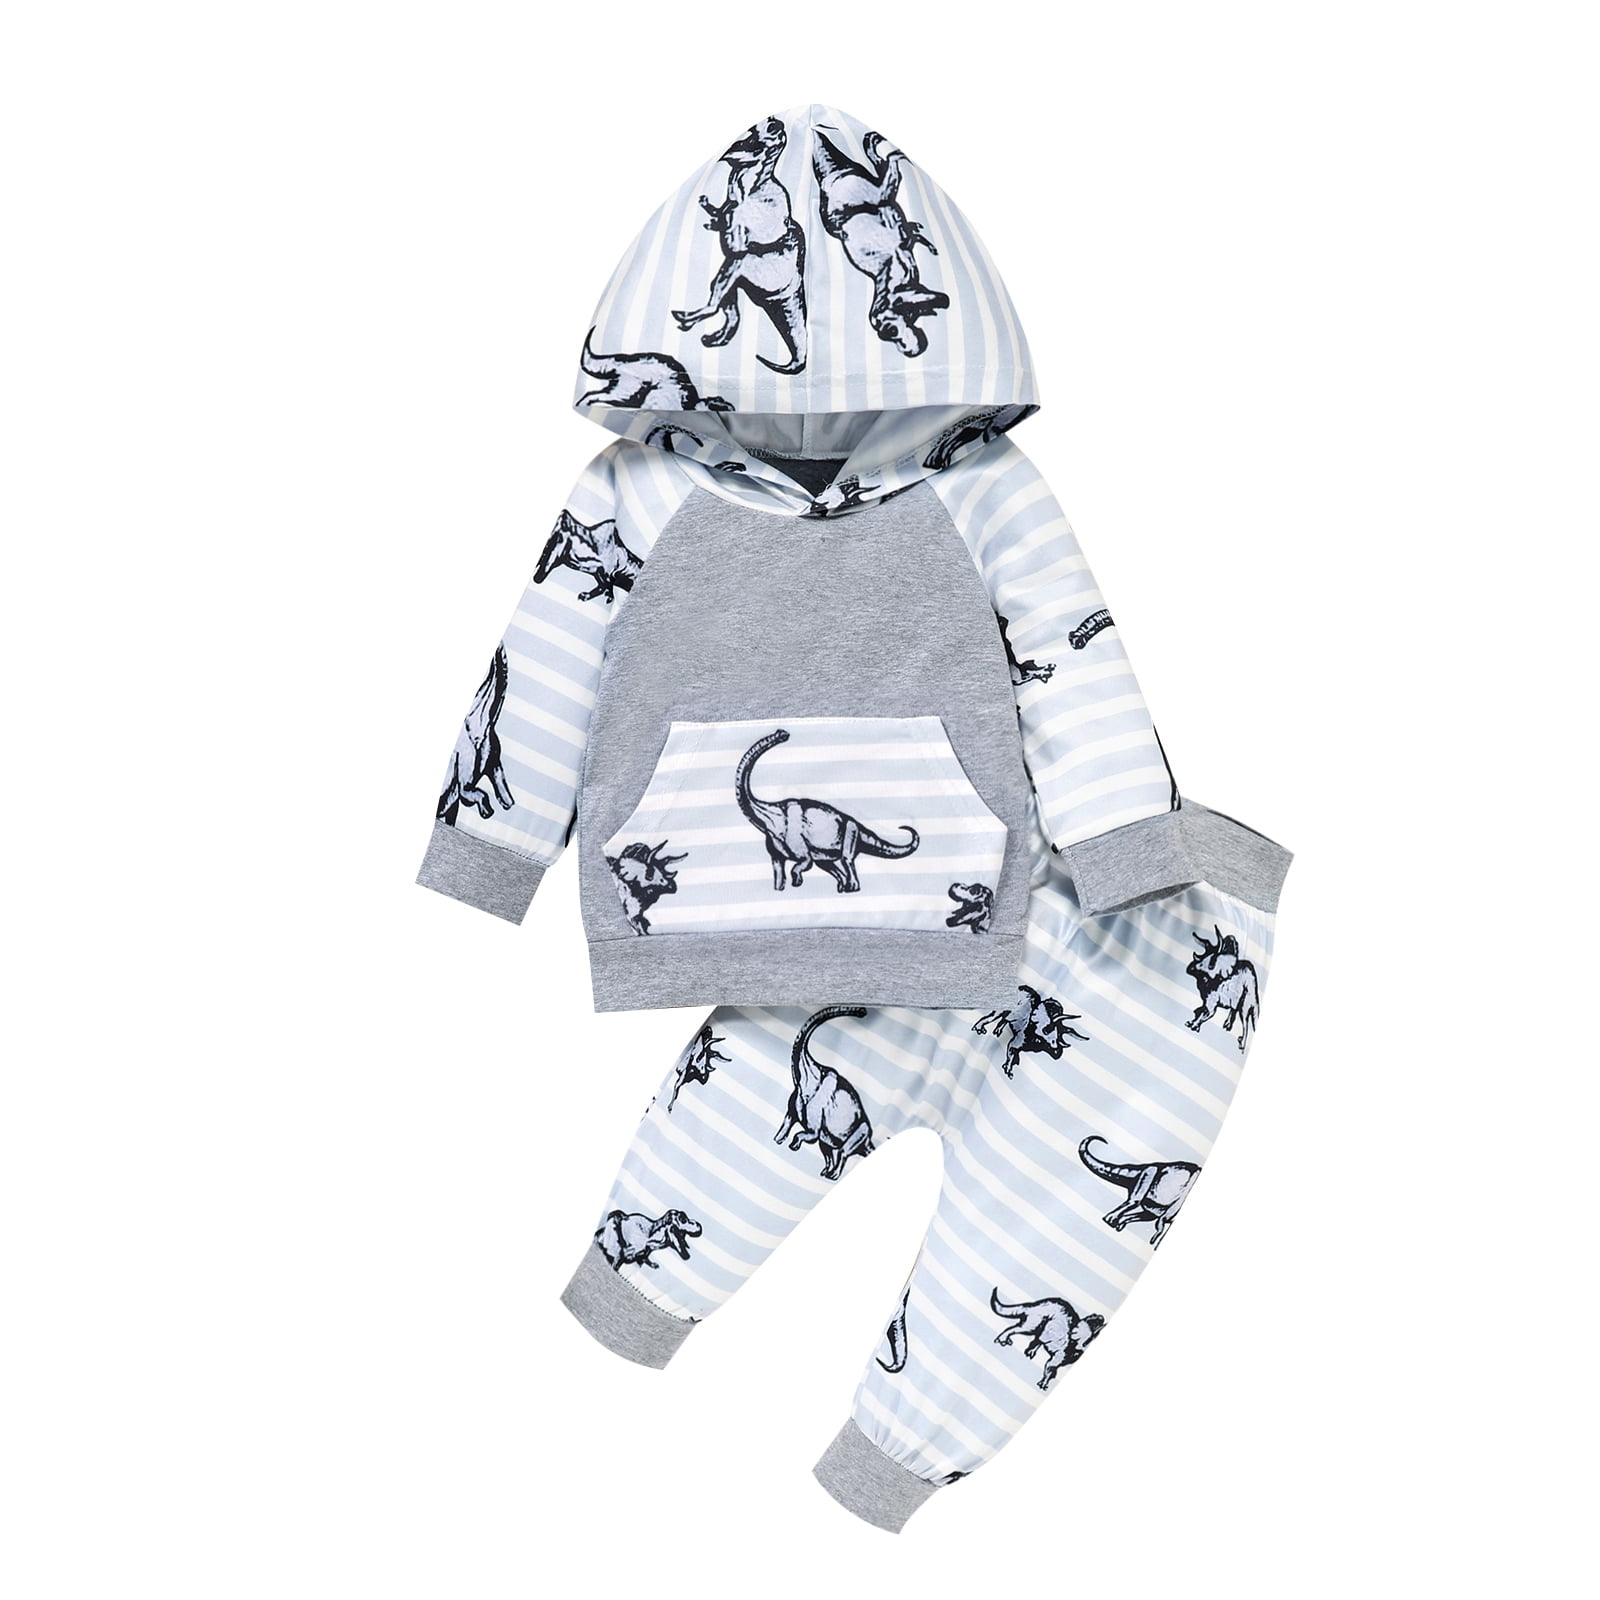 Baby Boy Clothes Long Sleeve Cartoon Print Hoodie Sweatshirt Tops and Striped Pants Sweatsuit Outfits Set